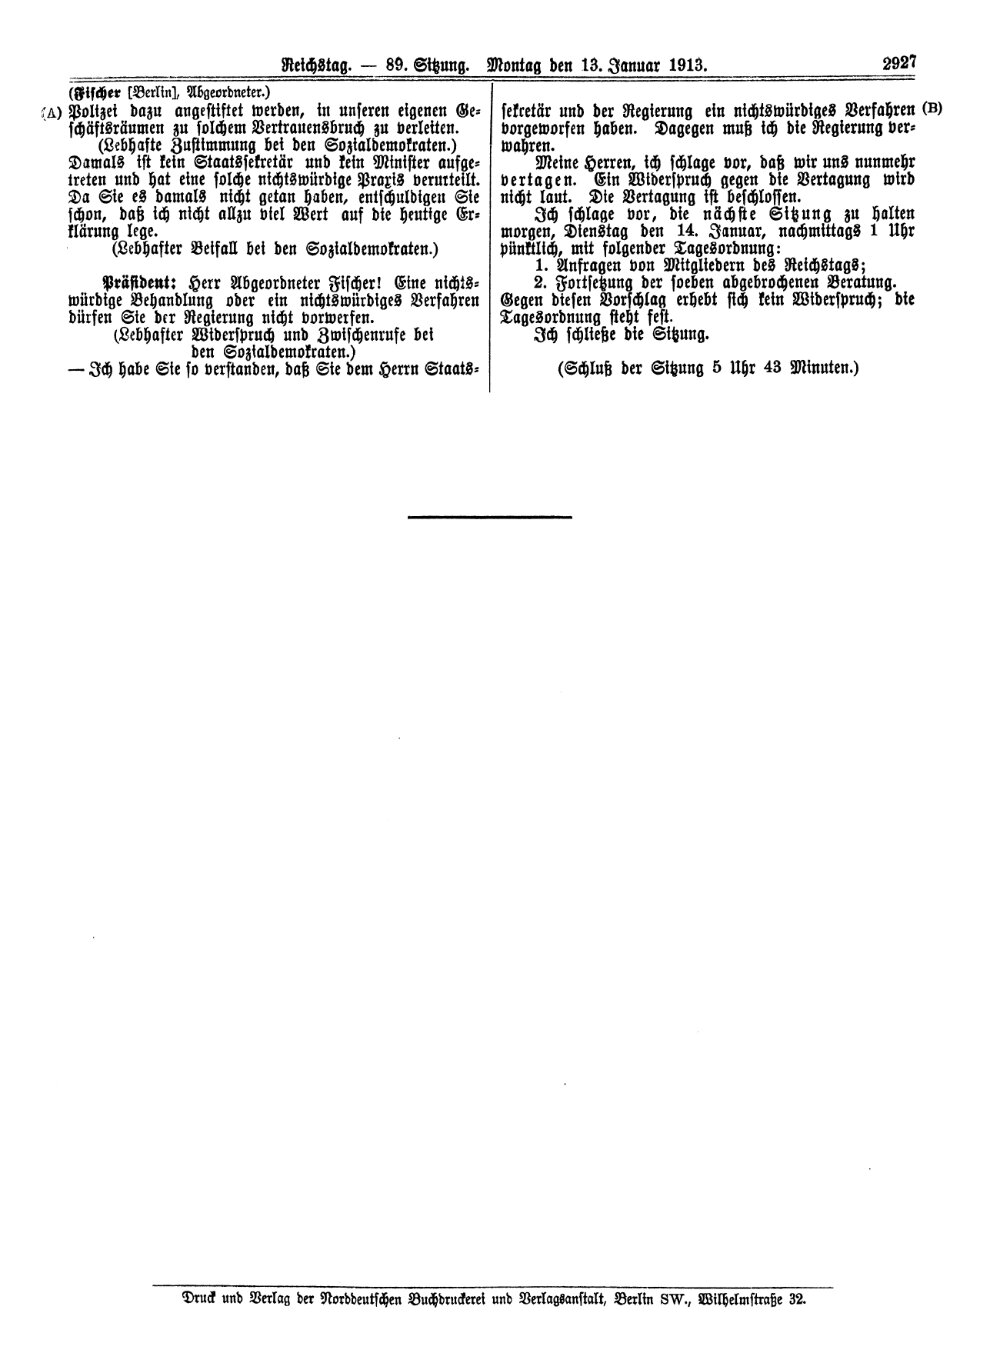 Scan of page 2927